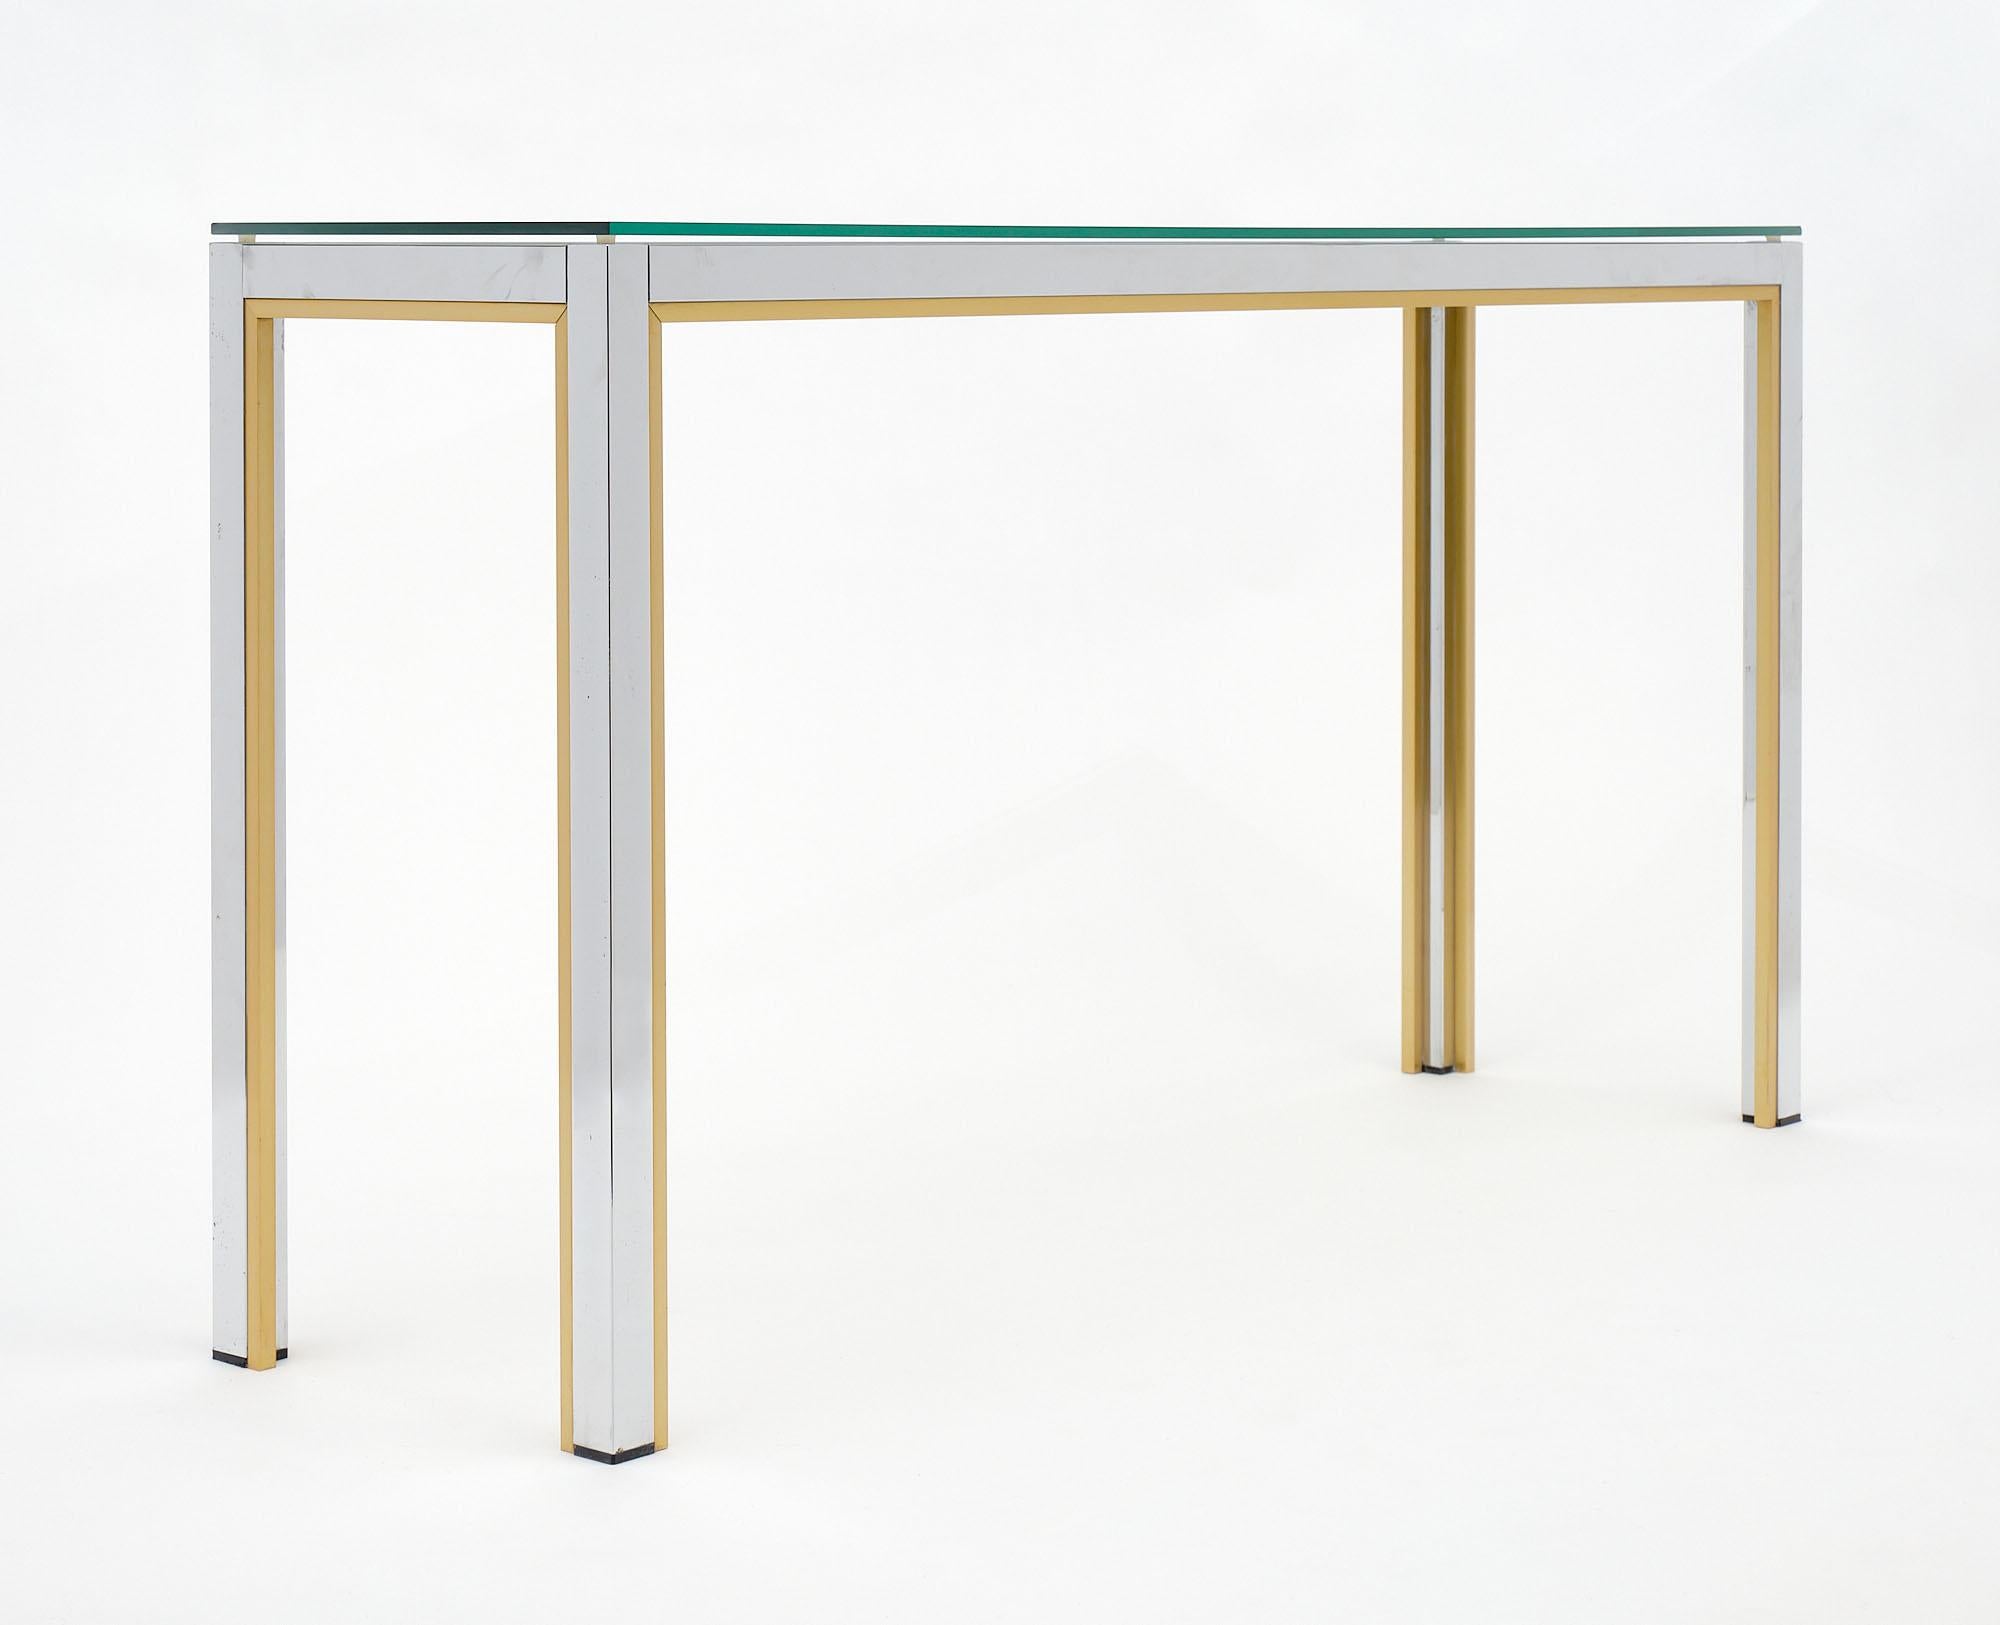 Console, Italian, Mid-Century Modern made of chromed steel and brass with a clear glass top. It is in the style of designer Willy Rizzo.